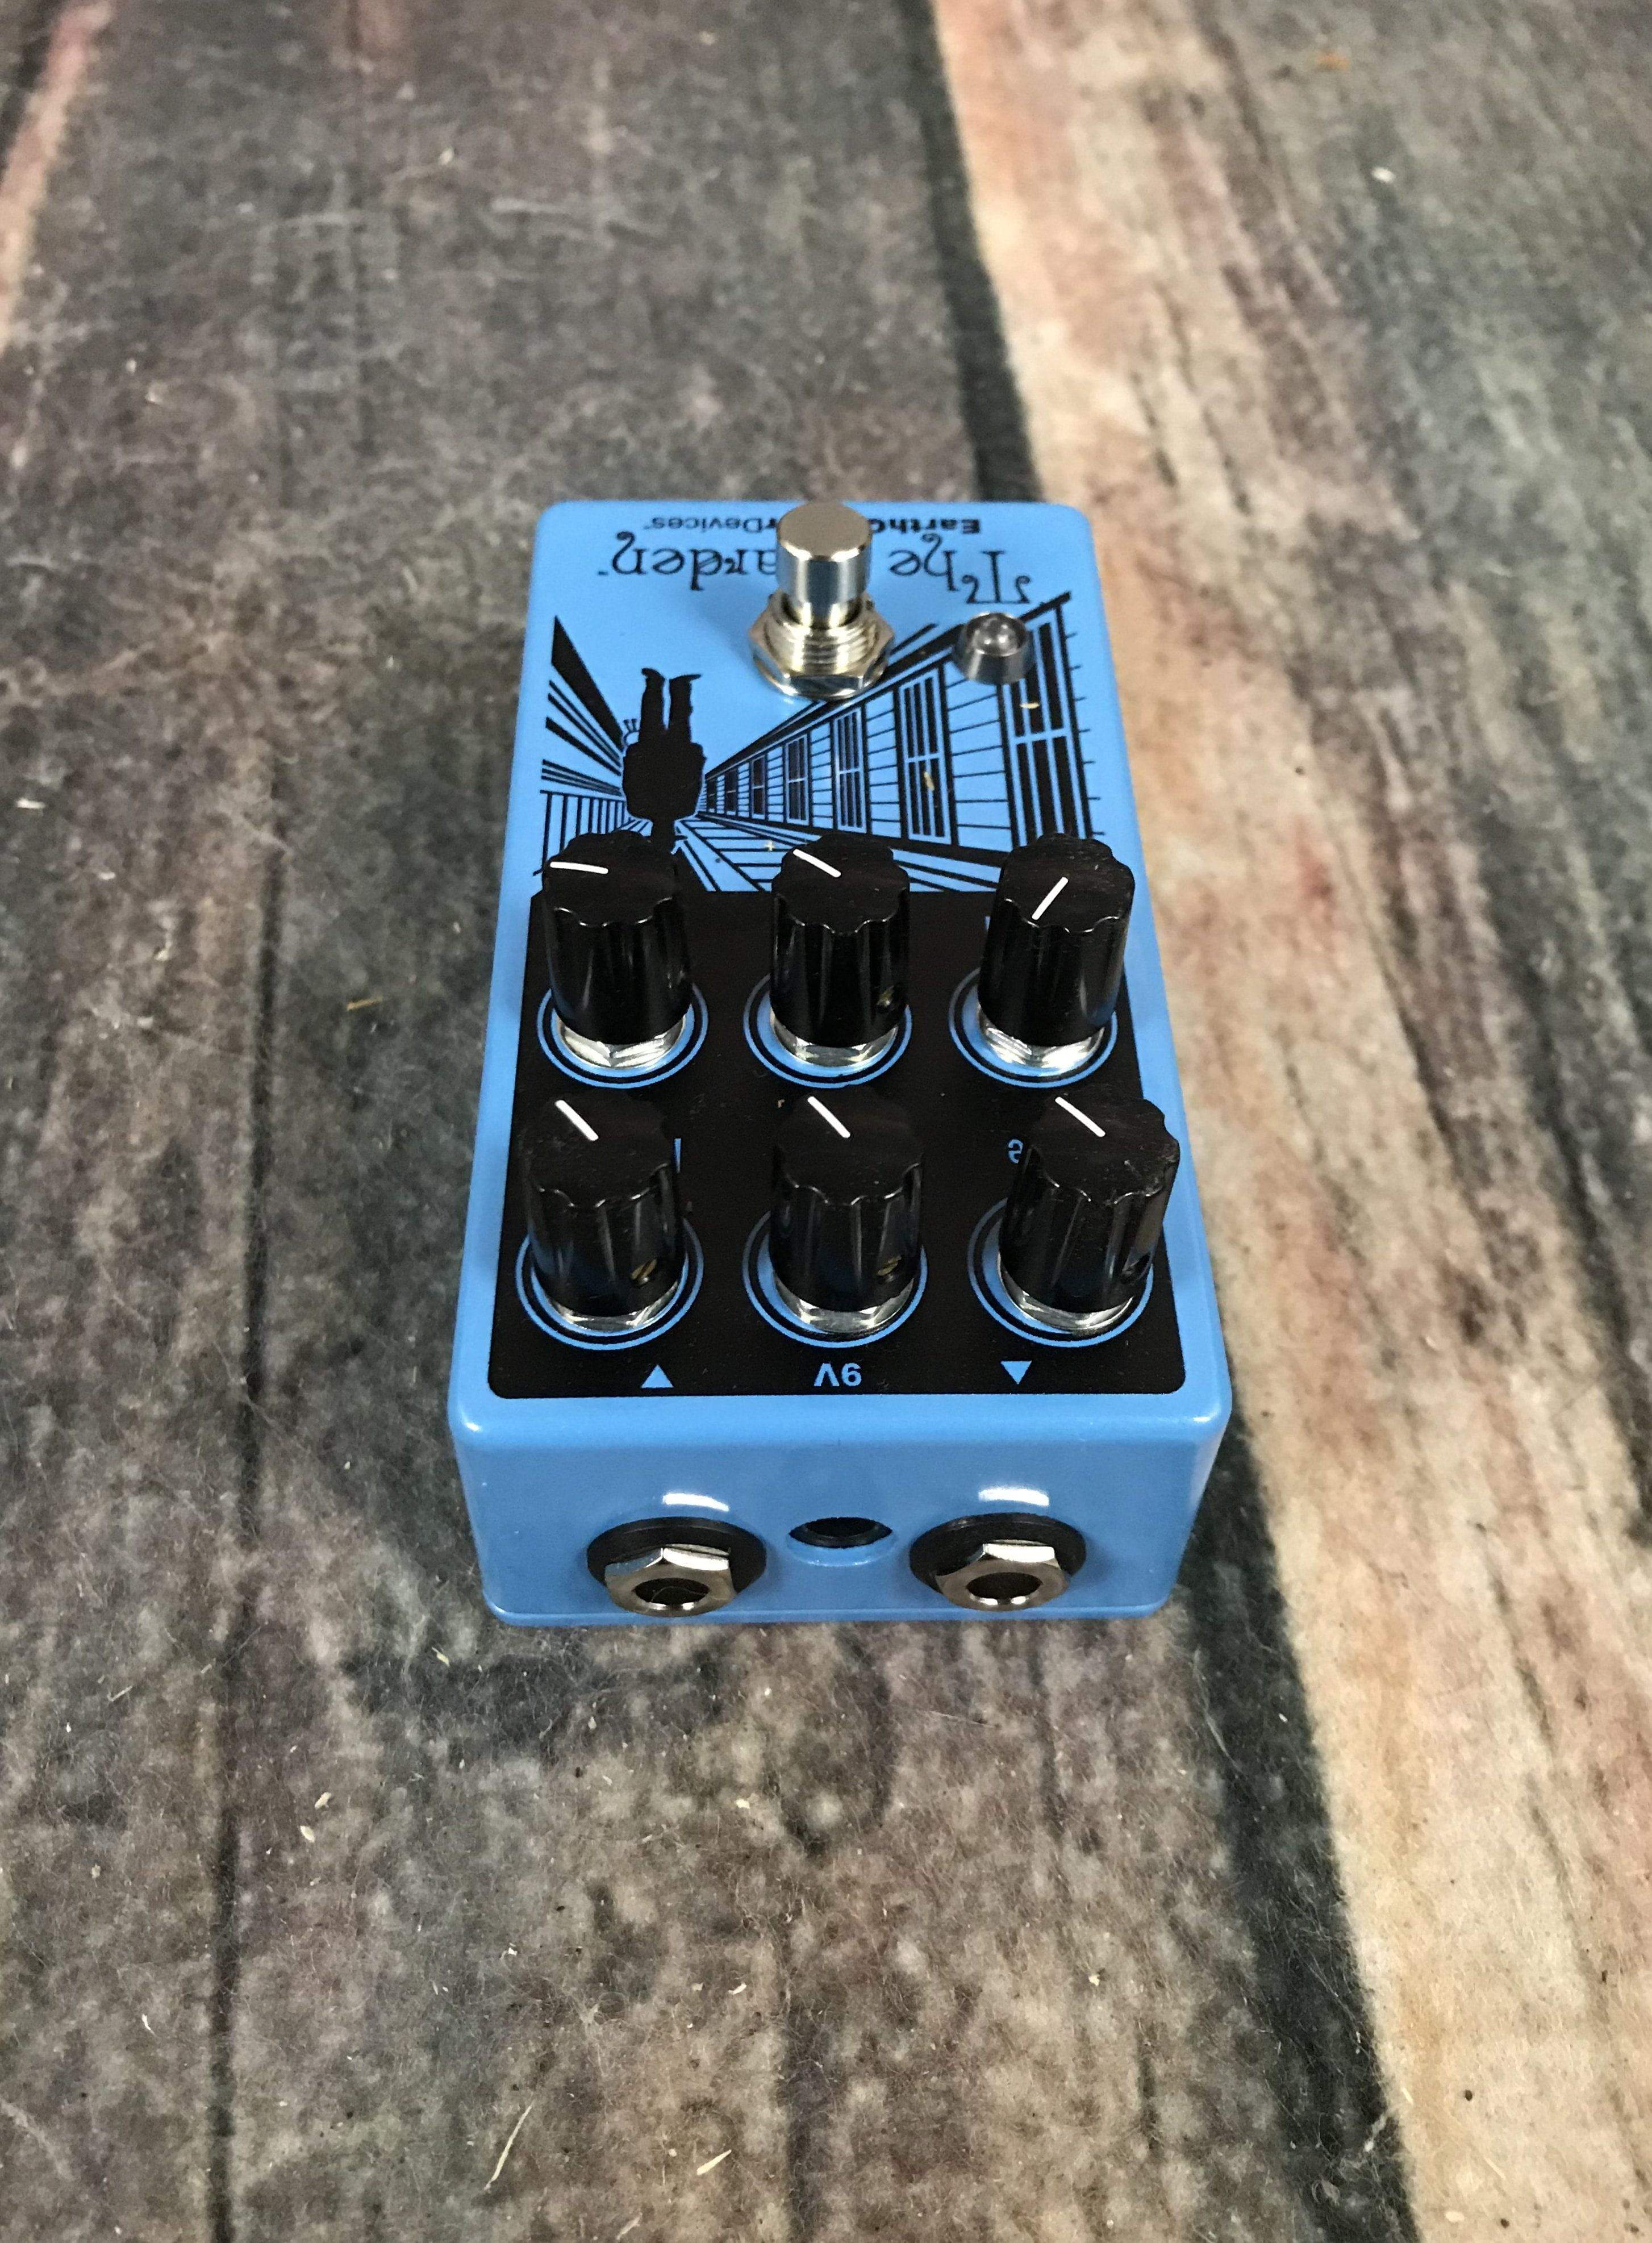 Earthquaker Devices The Warden Optical Compressor Pedal